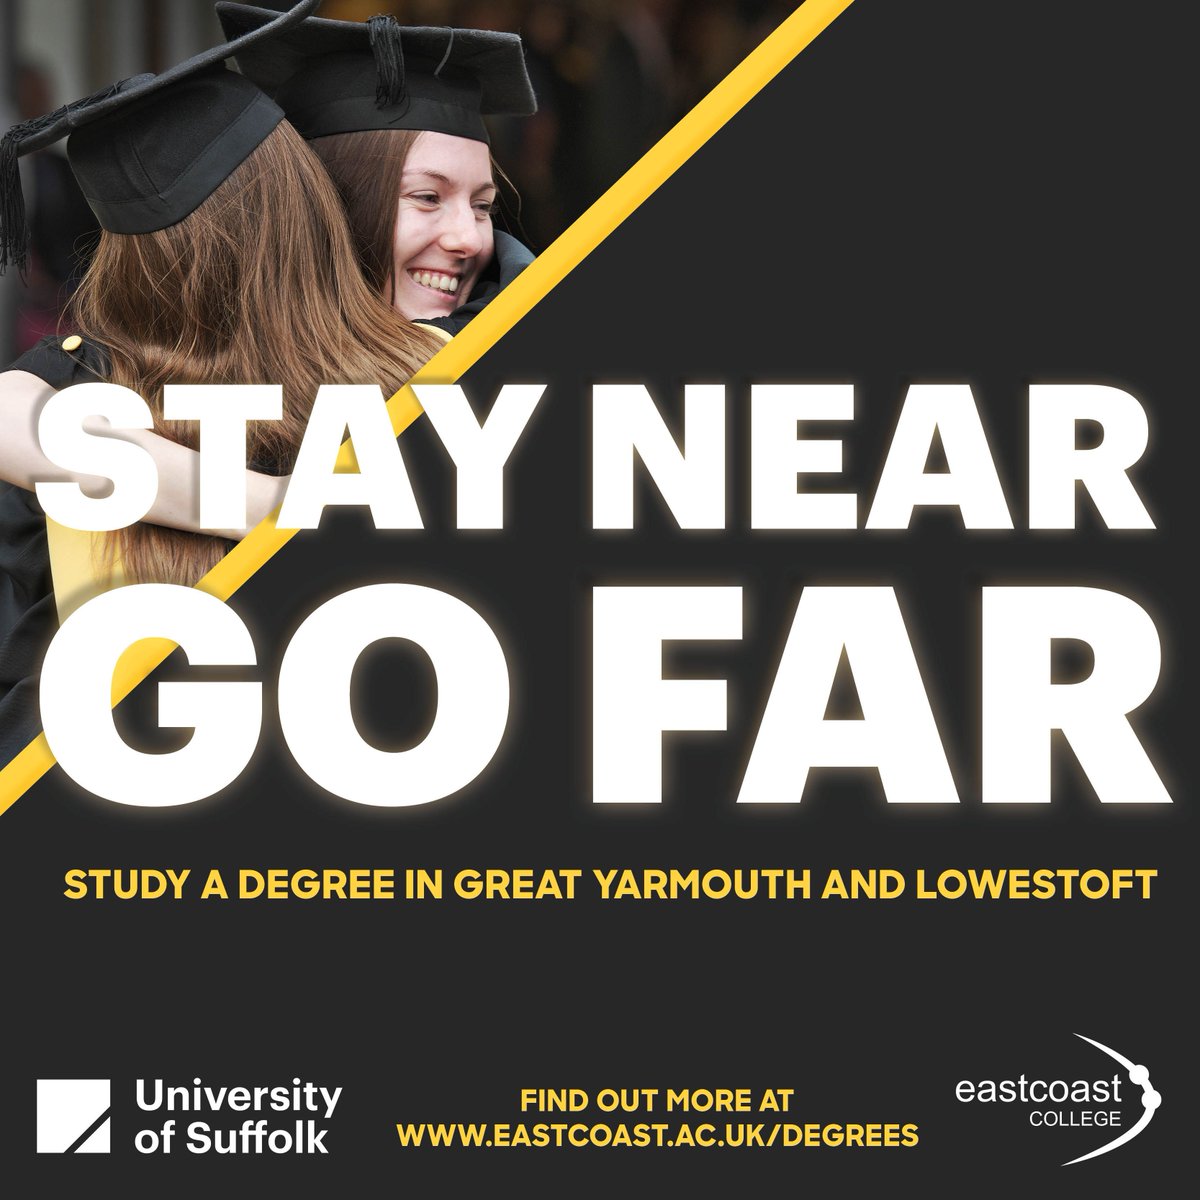 Thinking of doing a degree but want to stay close to home? The University of Suffolk at East Coast College is for you! Stay near, go far with degrees in Great Yarmouth and Lowestoft. Find out more and apply for 2024 at eastcoast.ac.uk/degrees/